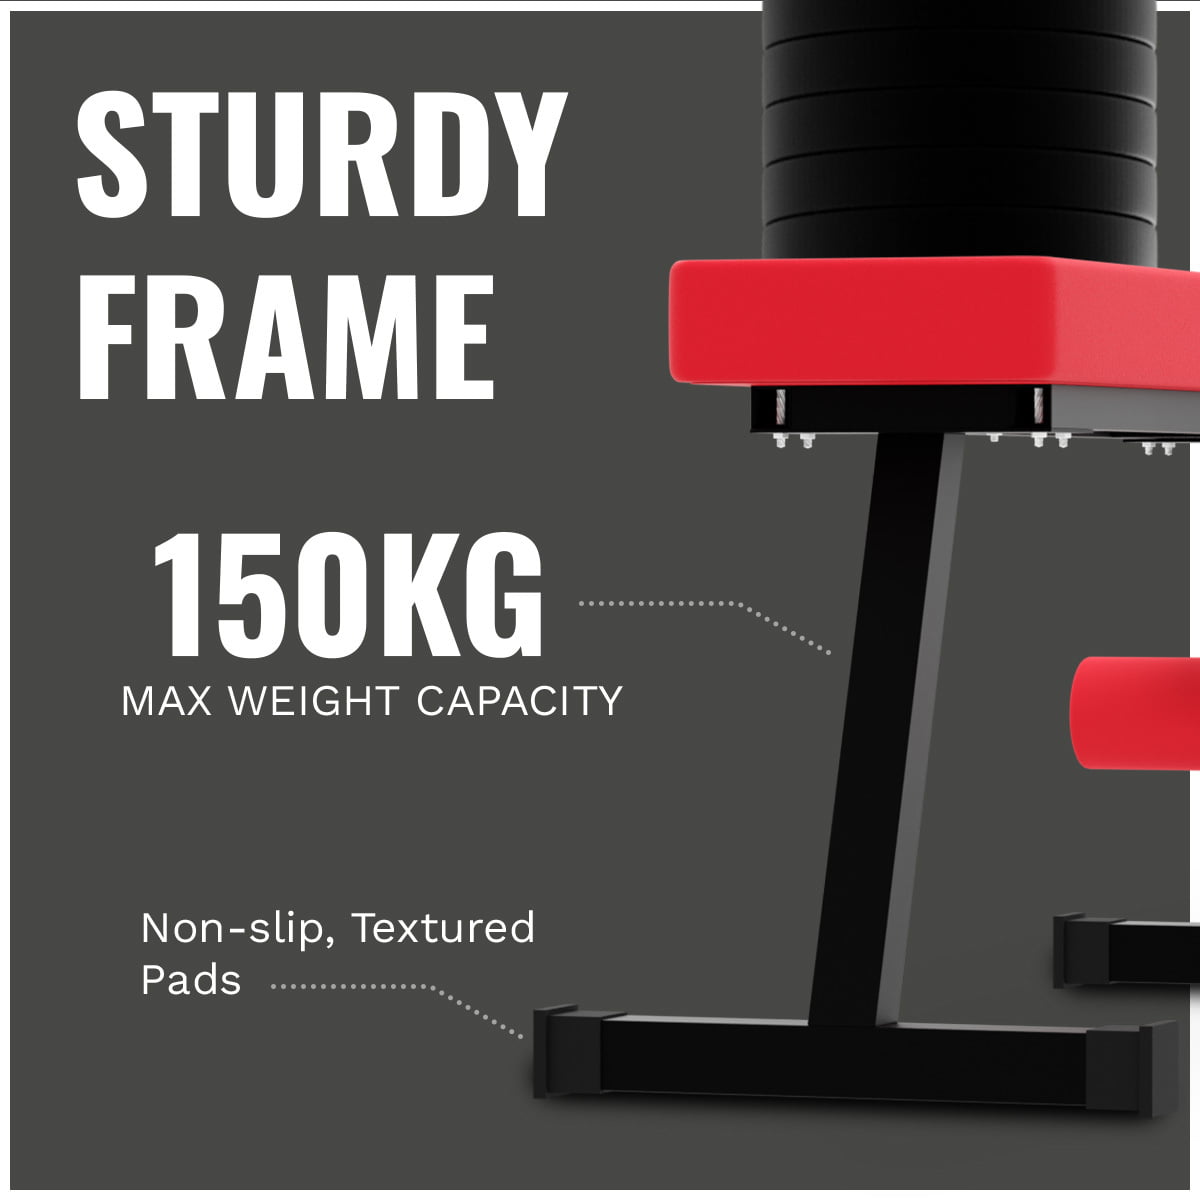 Durafit Simple Flat Bench SB01 with Max User Weight of 150kg